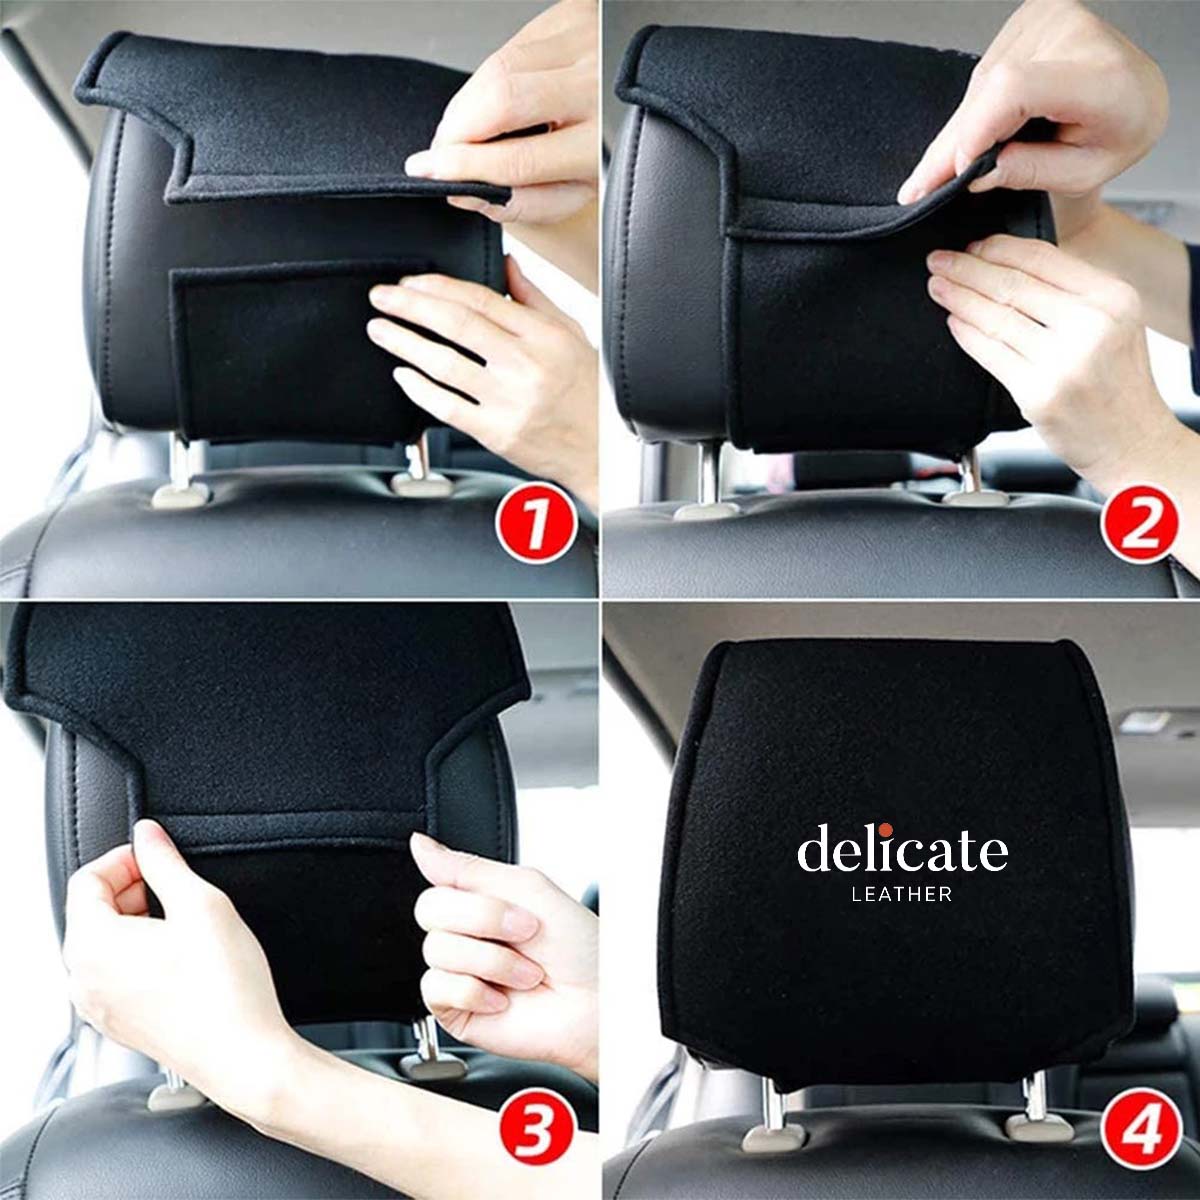 Car Seat Headrest Cover Breathable Flexible Headrest Covers Velcro Auto Headrest Covers Universal Fit, Custom For Your Cars, Car Accessories MT13998 - Delicate Leather